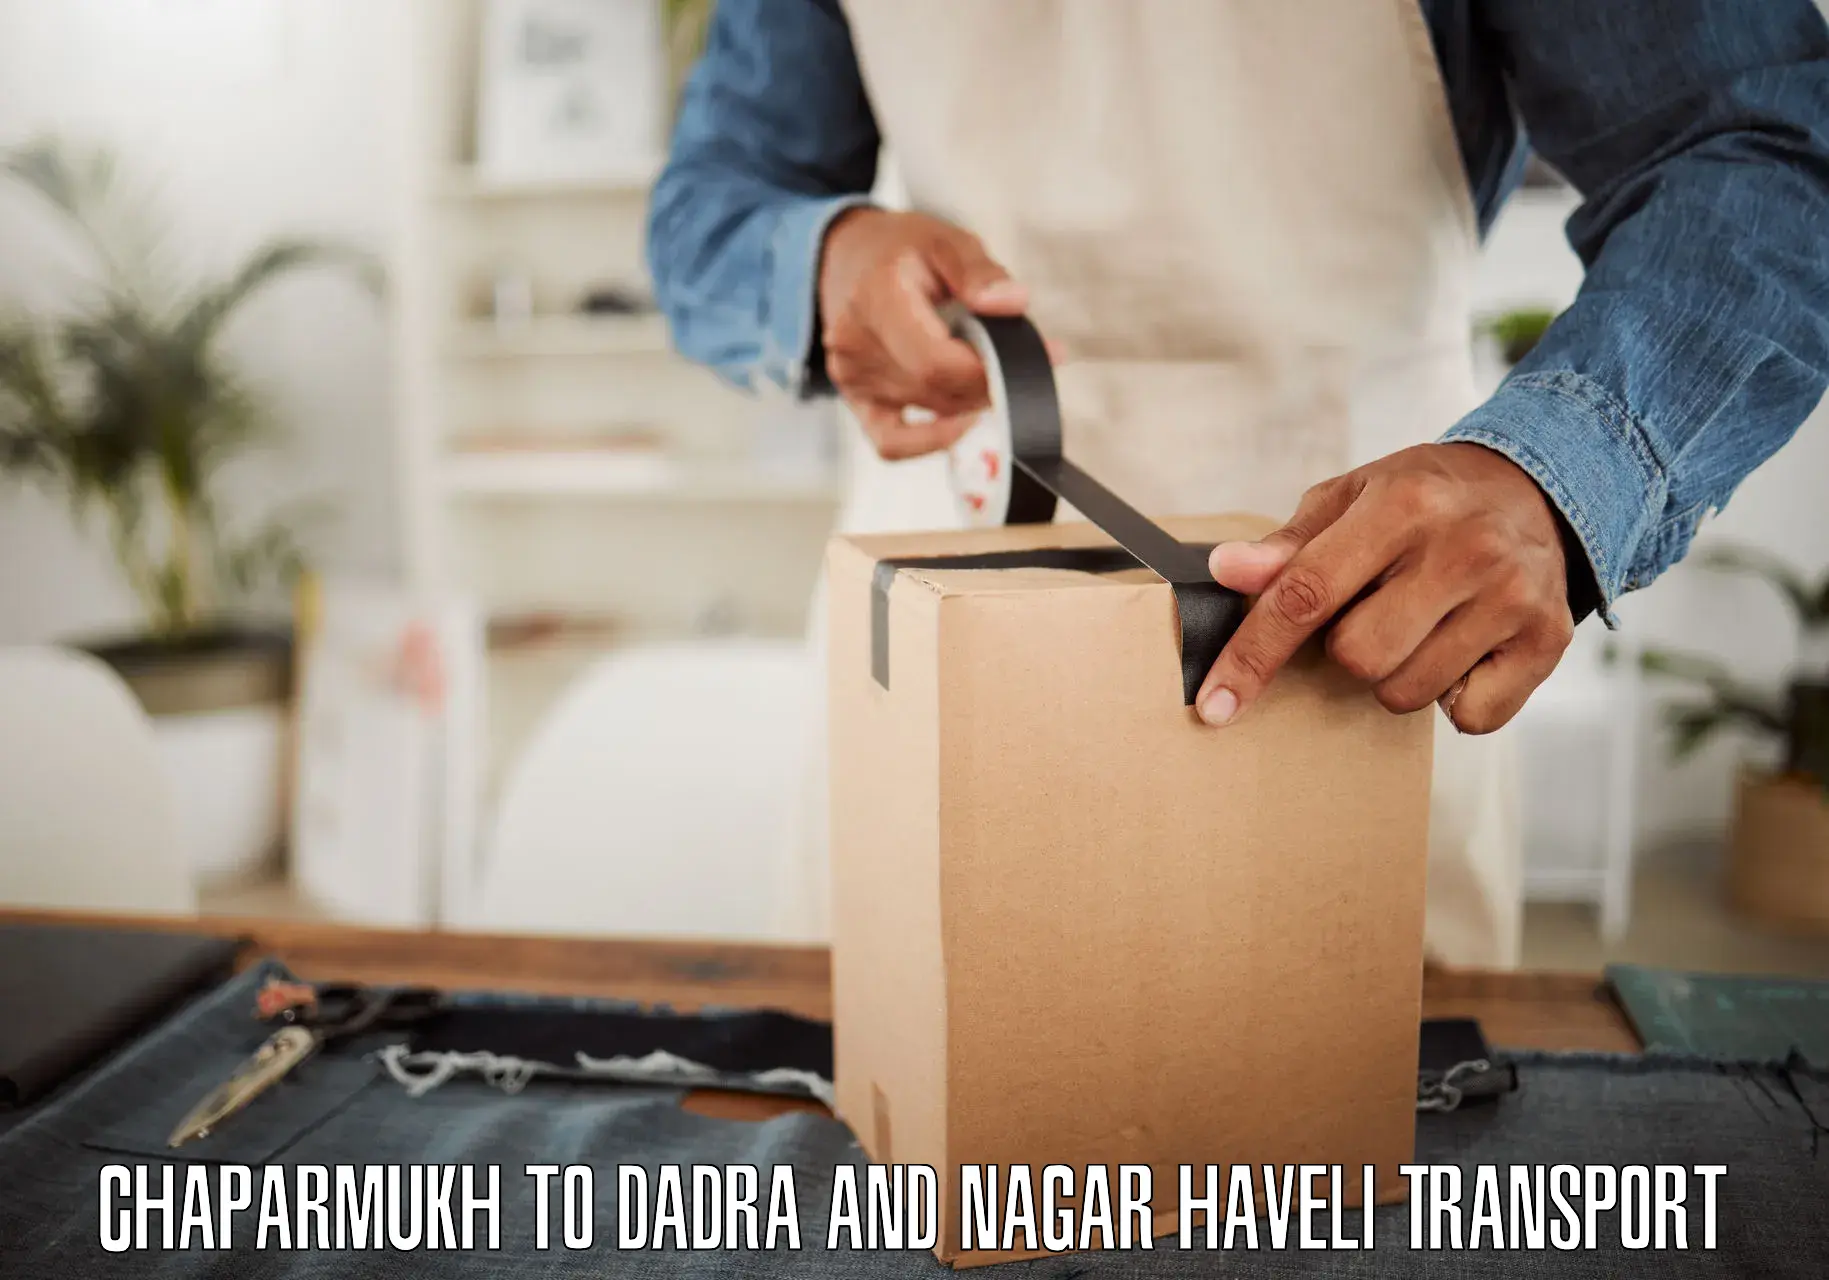 Daily parcel service transport Chaparmukh to Dadra and Nagar Haveli